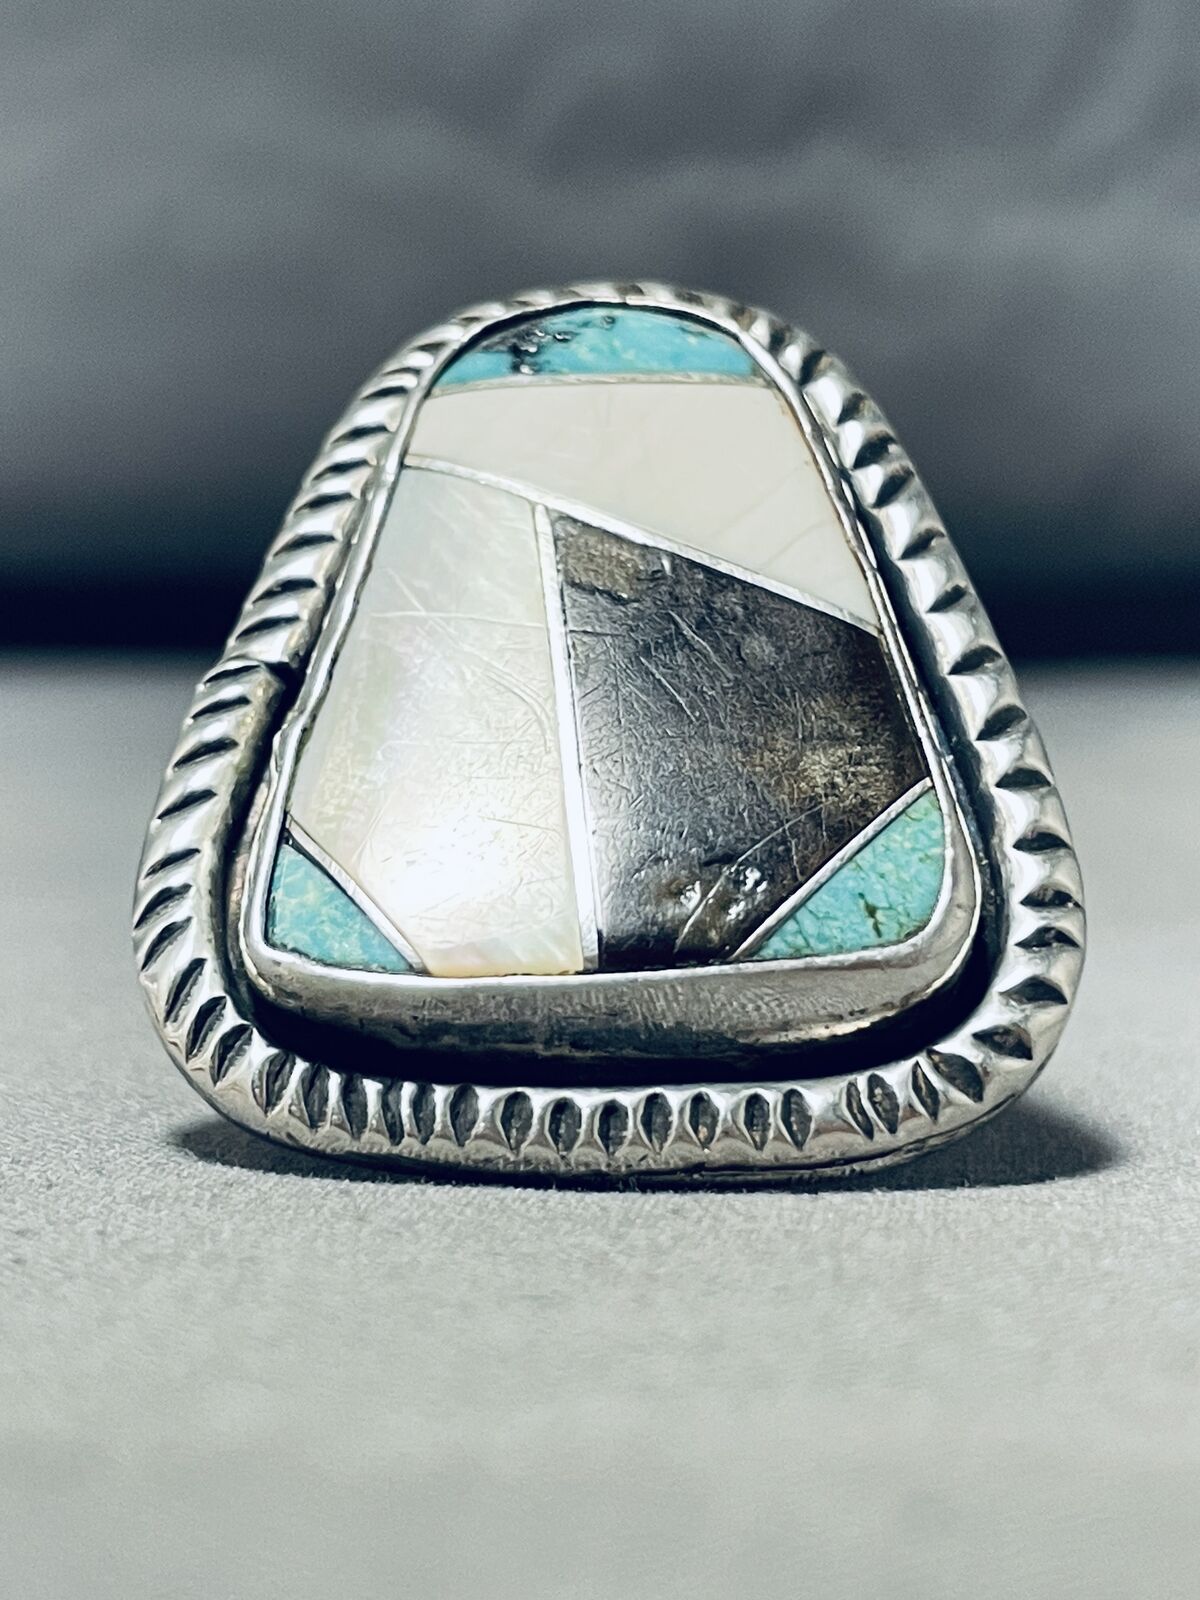 MAJESTIC VINTAGE NAVAJO INLAY KINGMAN TURQUOISE MOTHER OF PEARL SILVER RING